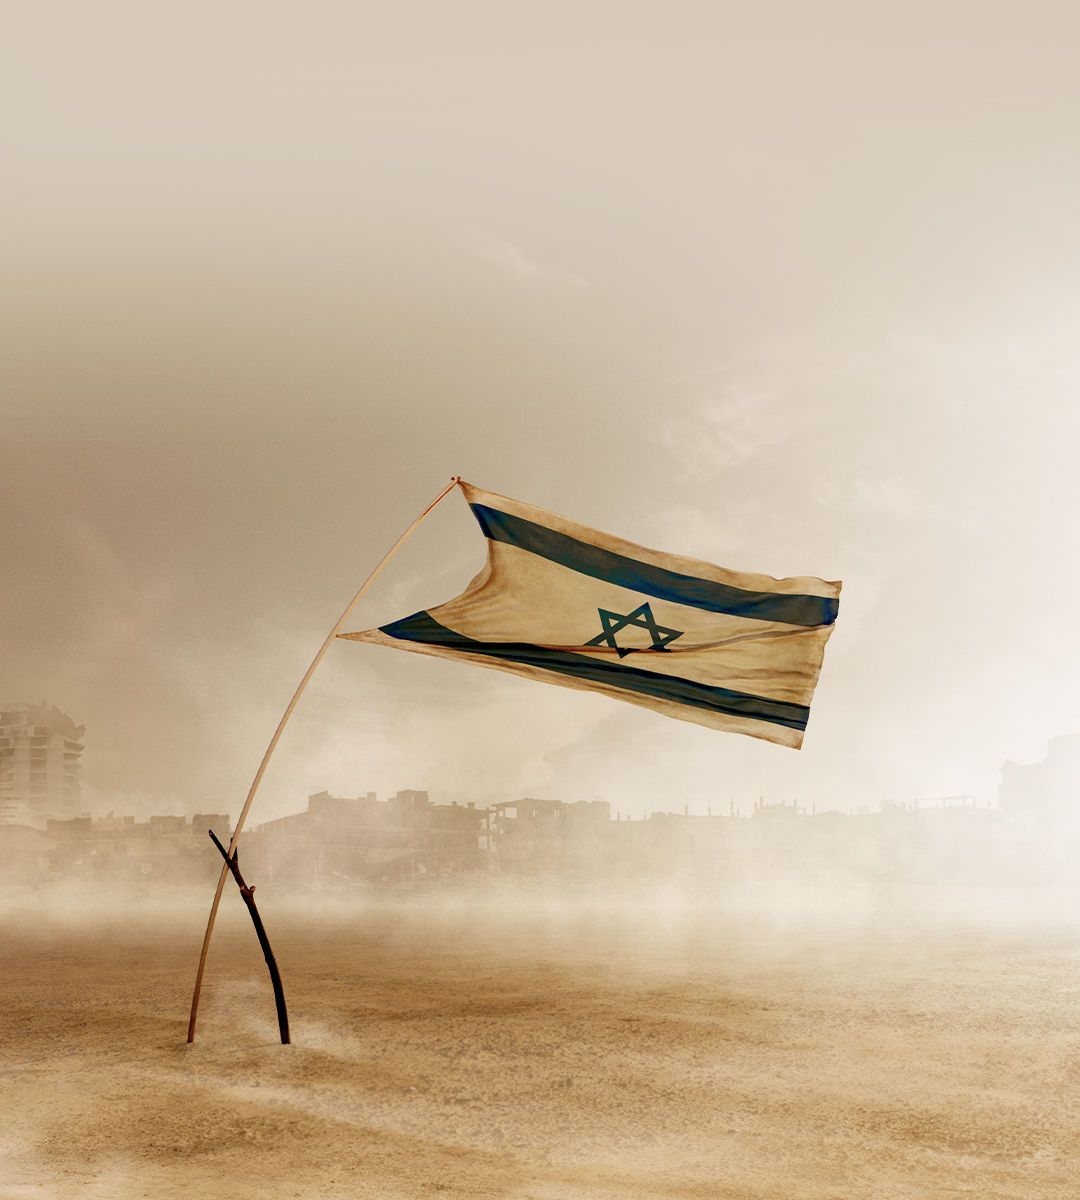 The flag of Israel being blown in a sandstorm